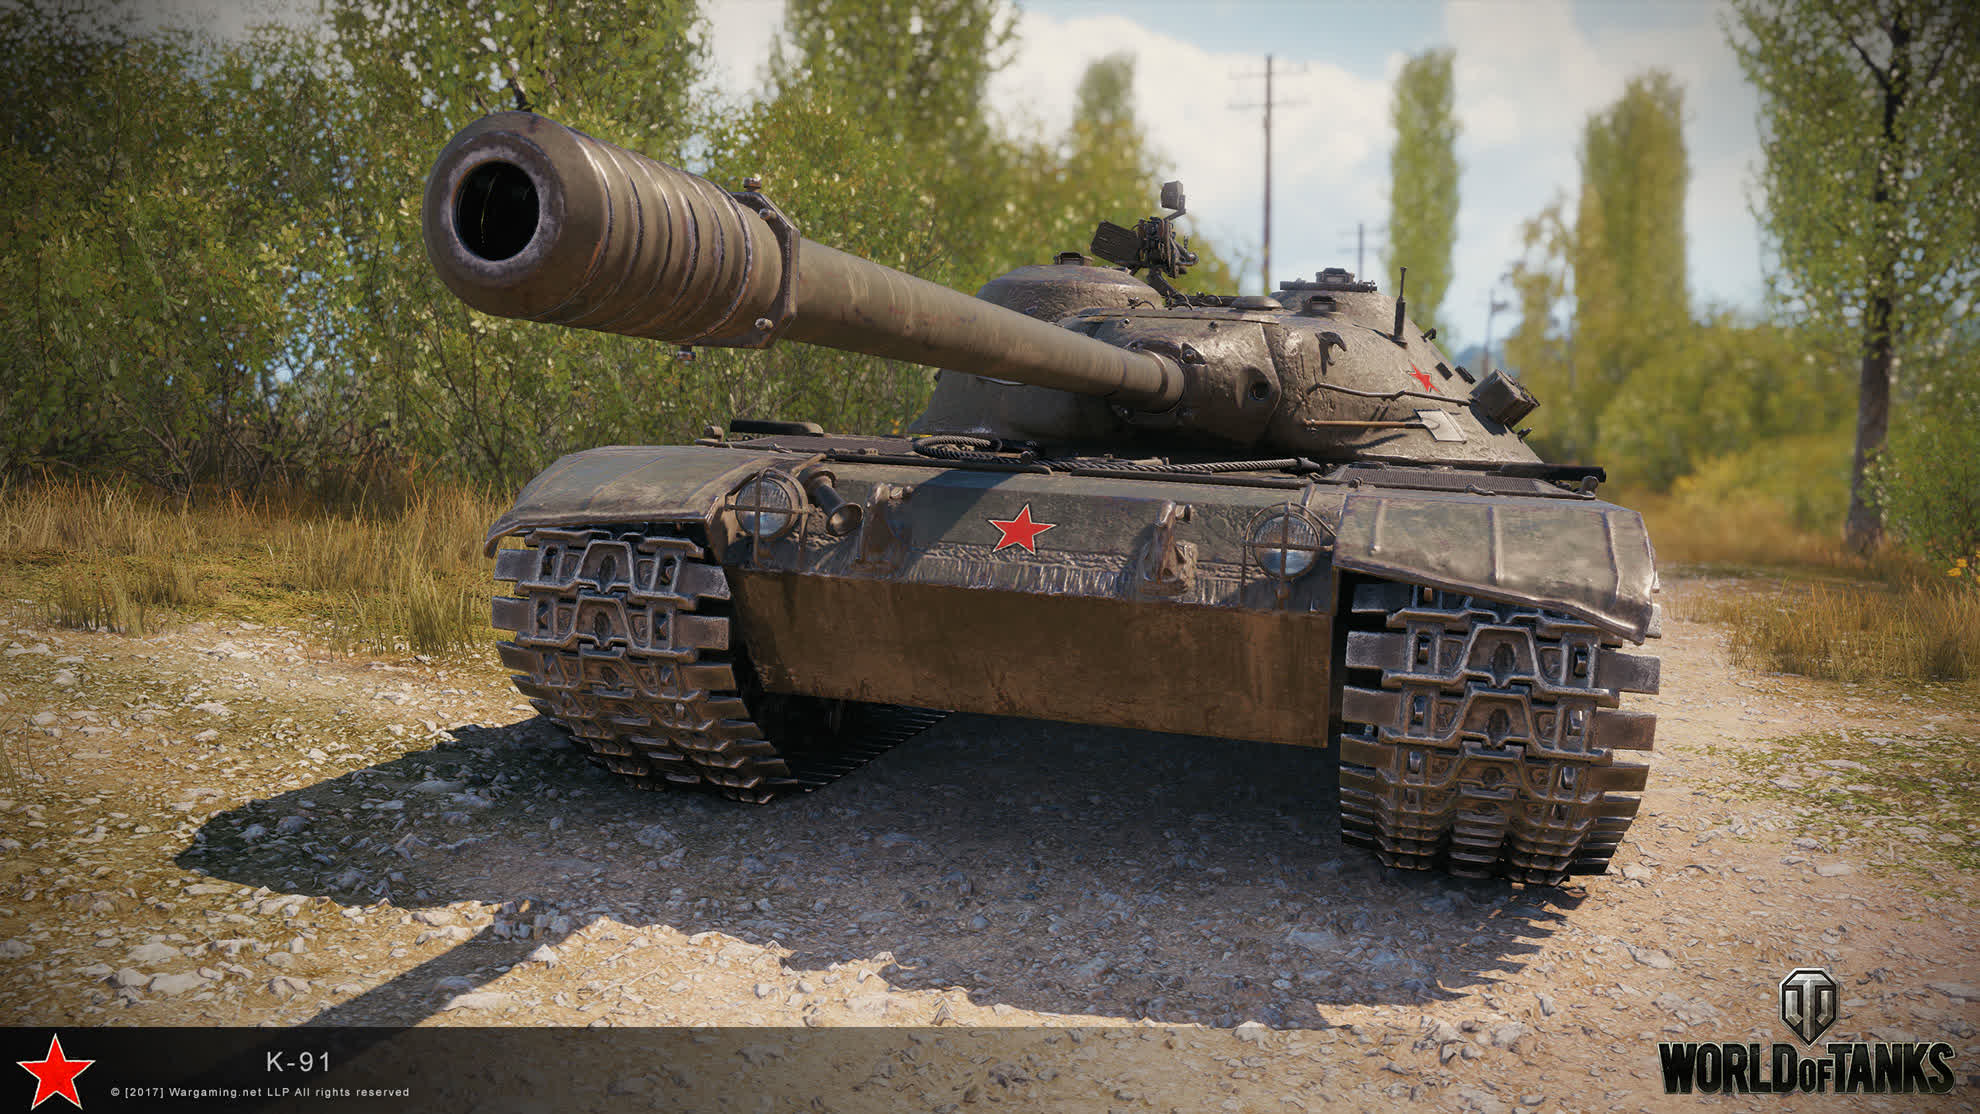 World of Tanks creative director fired for publicly supporting Russian invasion